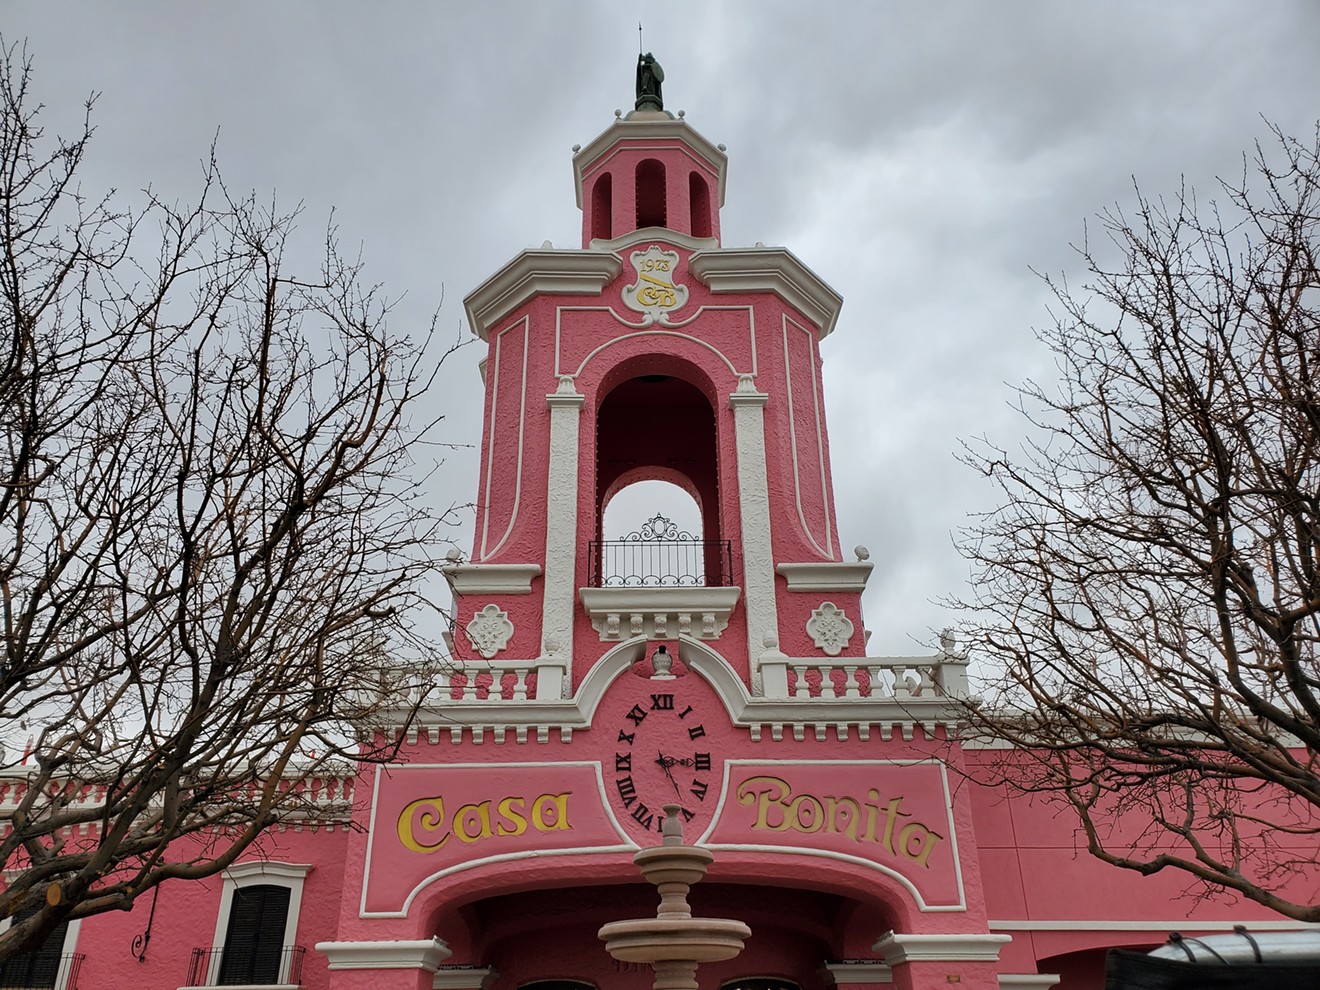 Excitement continues to build as Casa Bonita's opening gets closer.